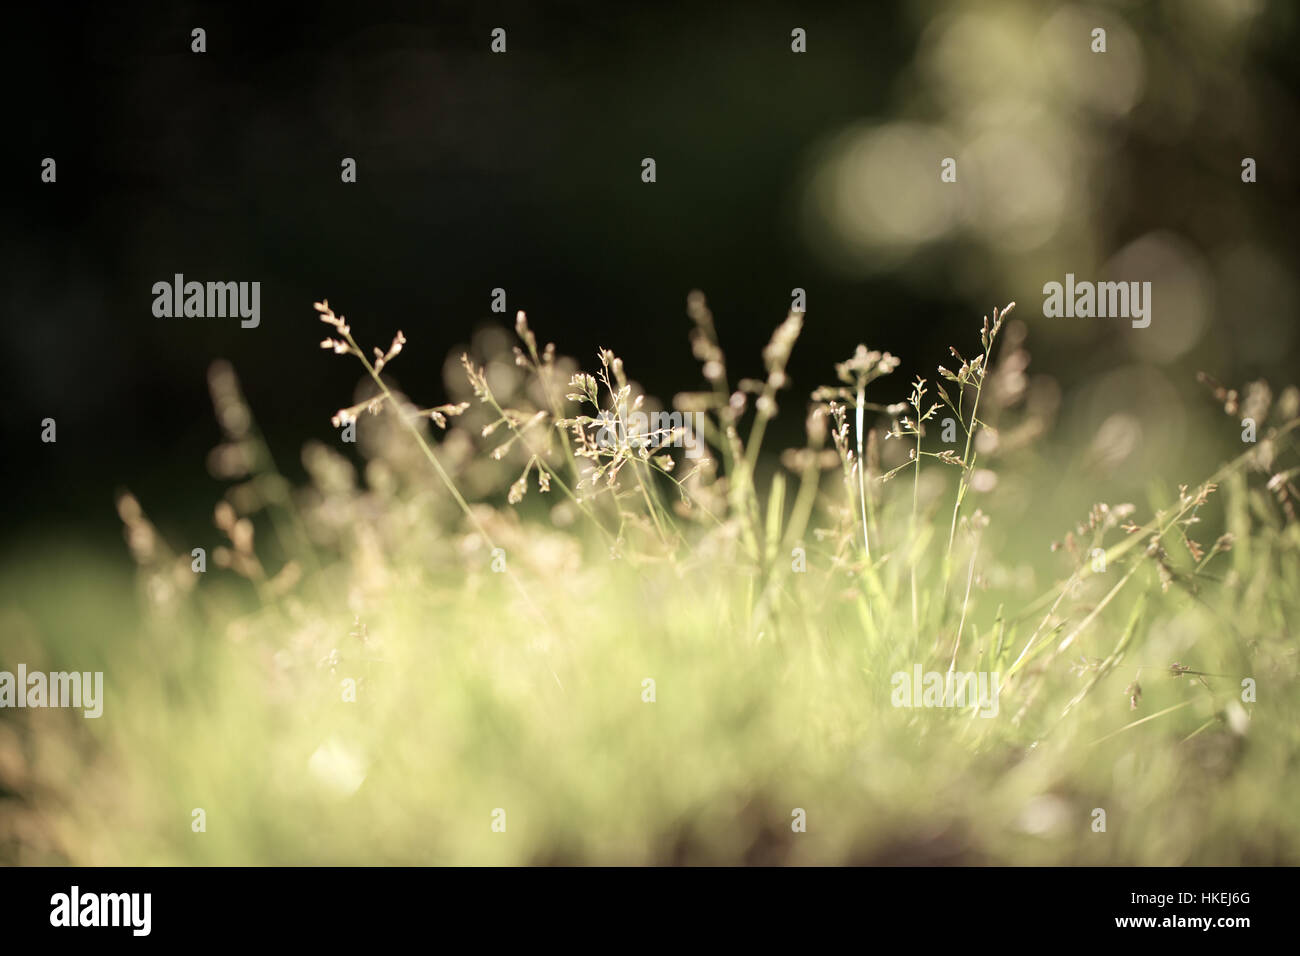 green grass and flowers. nature, growth, botany, stem. Stock Photo